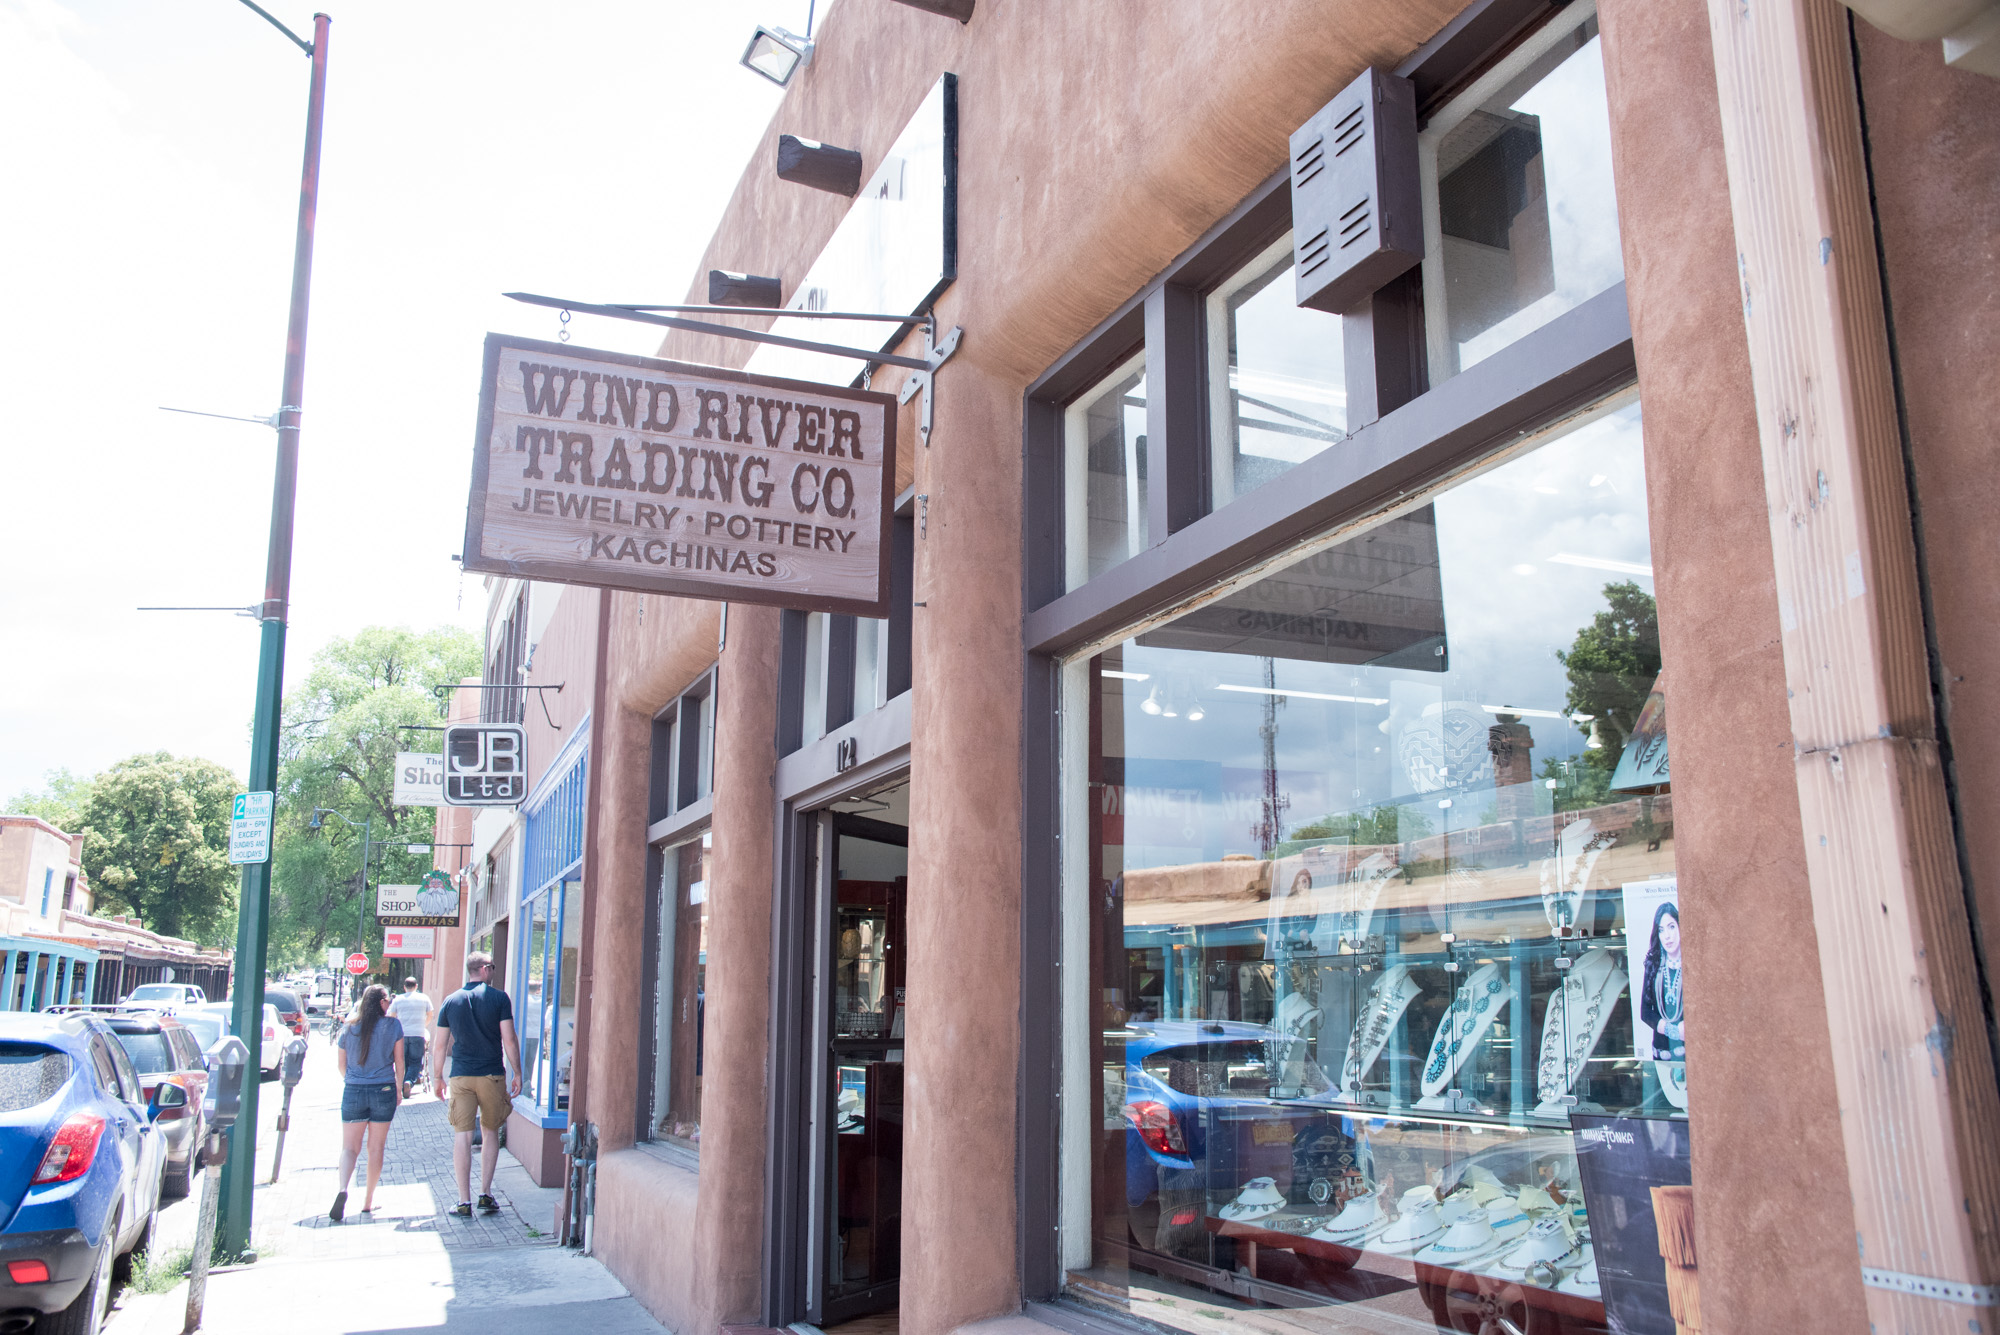 Where to Find Jewelry Supplies in Santa Fe